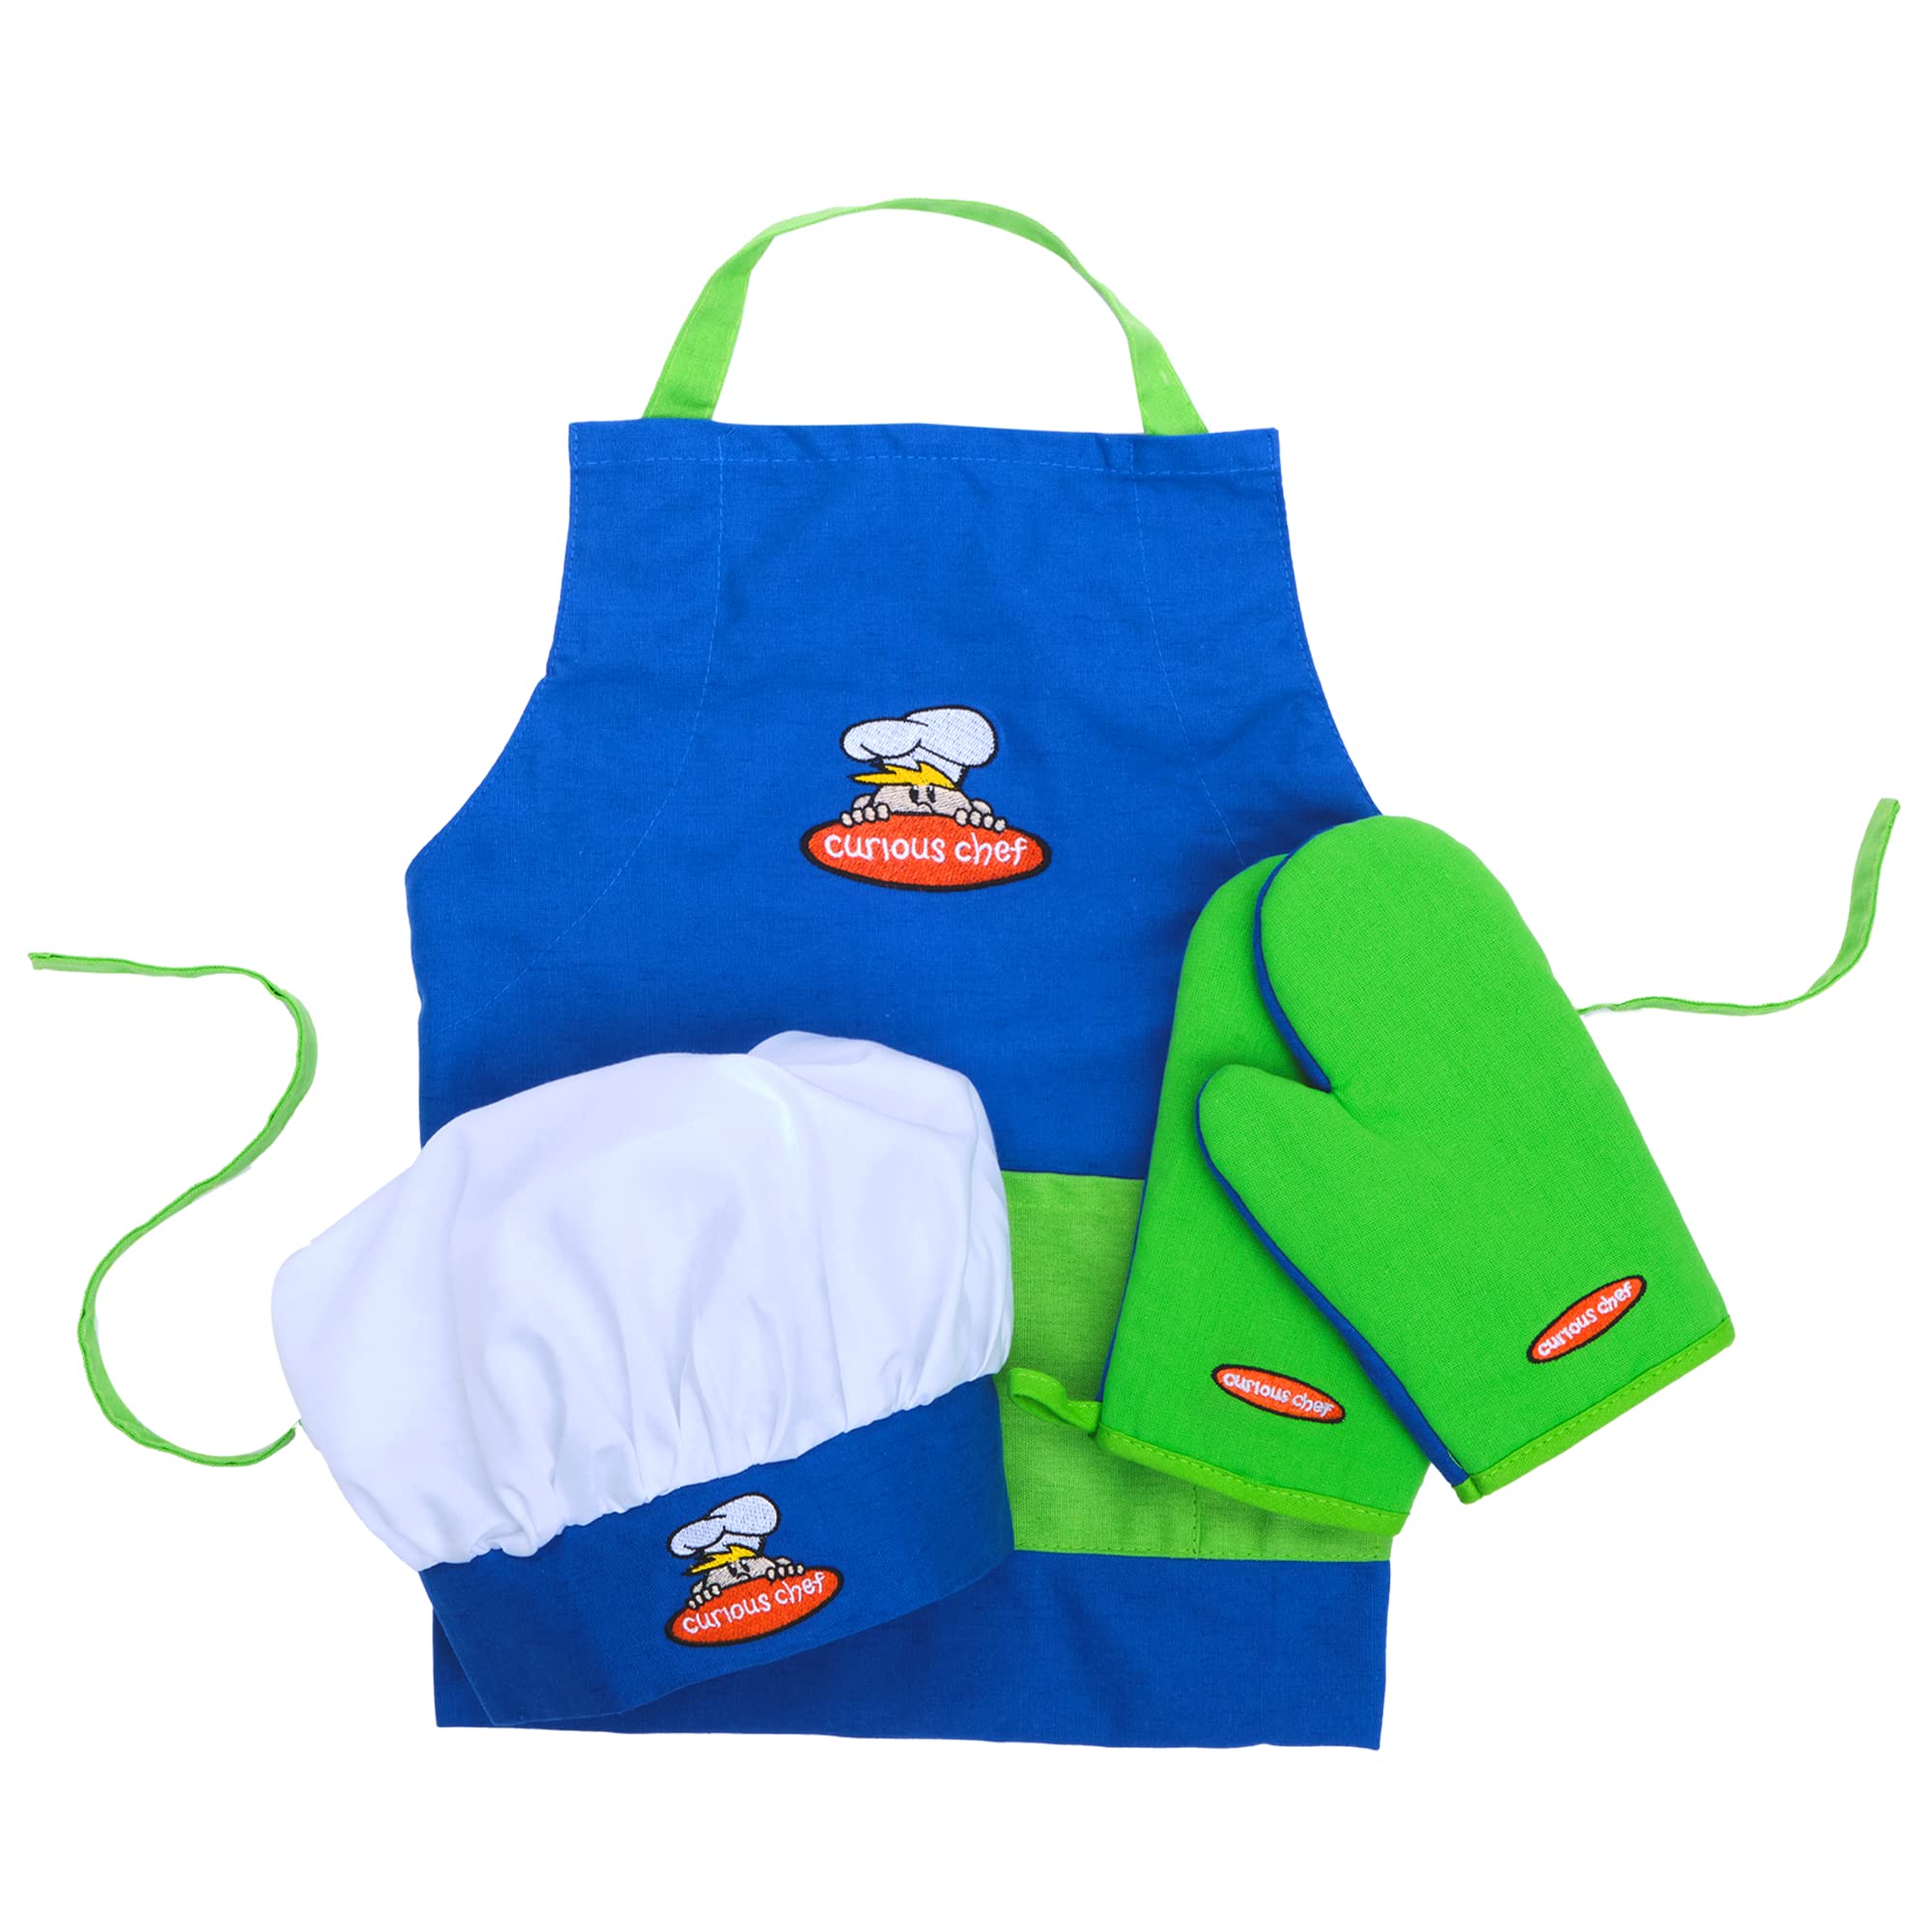 Curious Chef Child Chef Textile Set for Kids